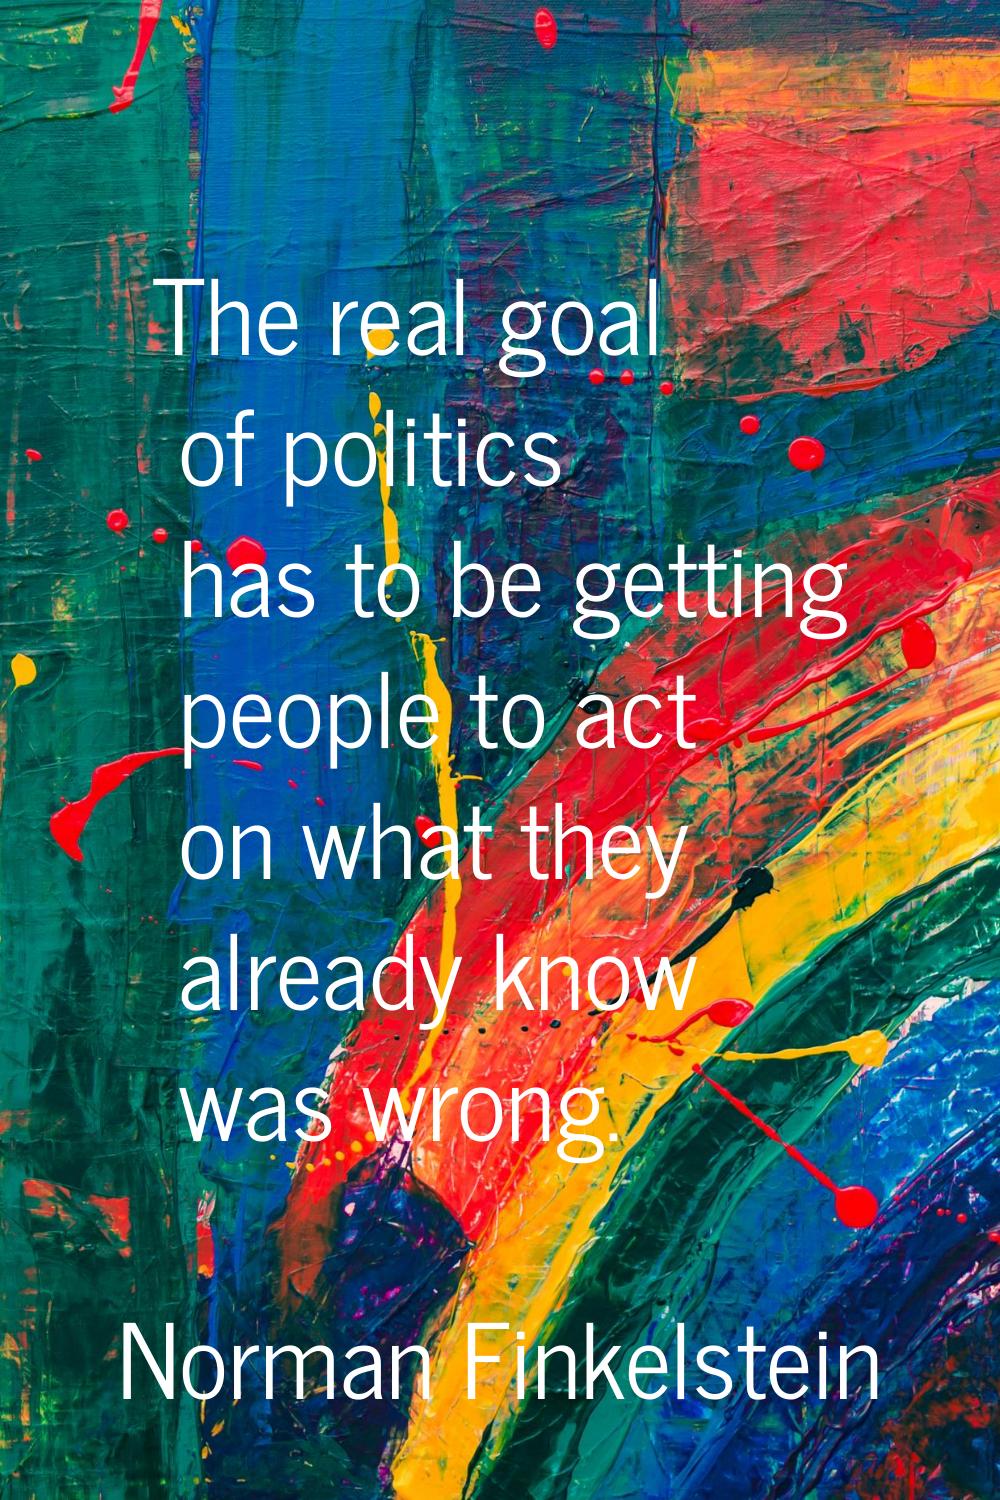 The real goal of politics has to be getting people to act on what they already know was wrong.